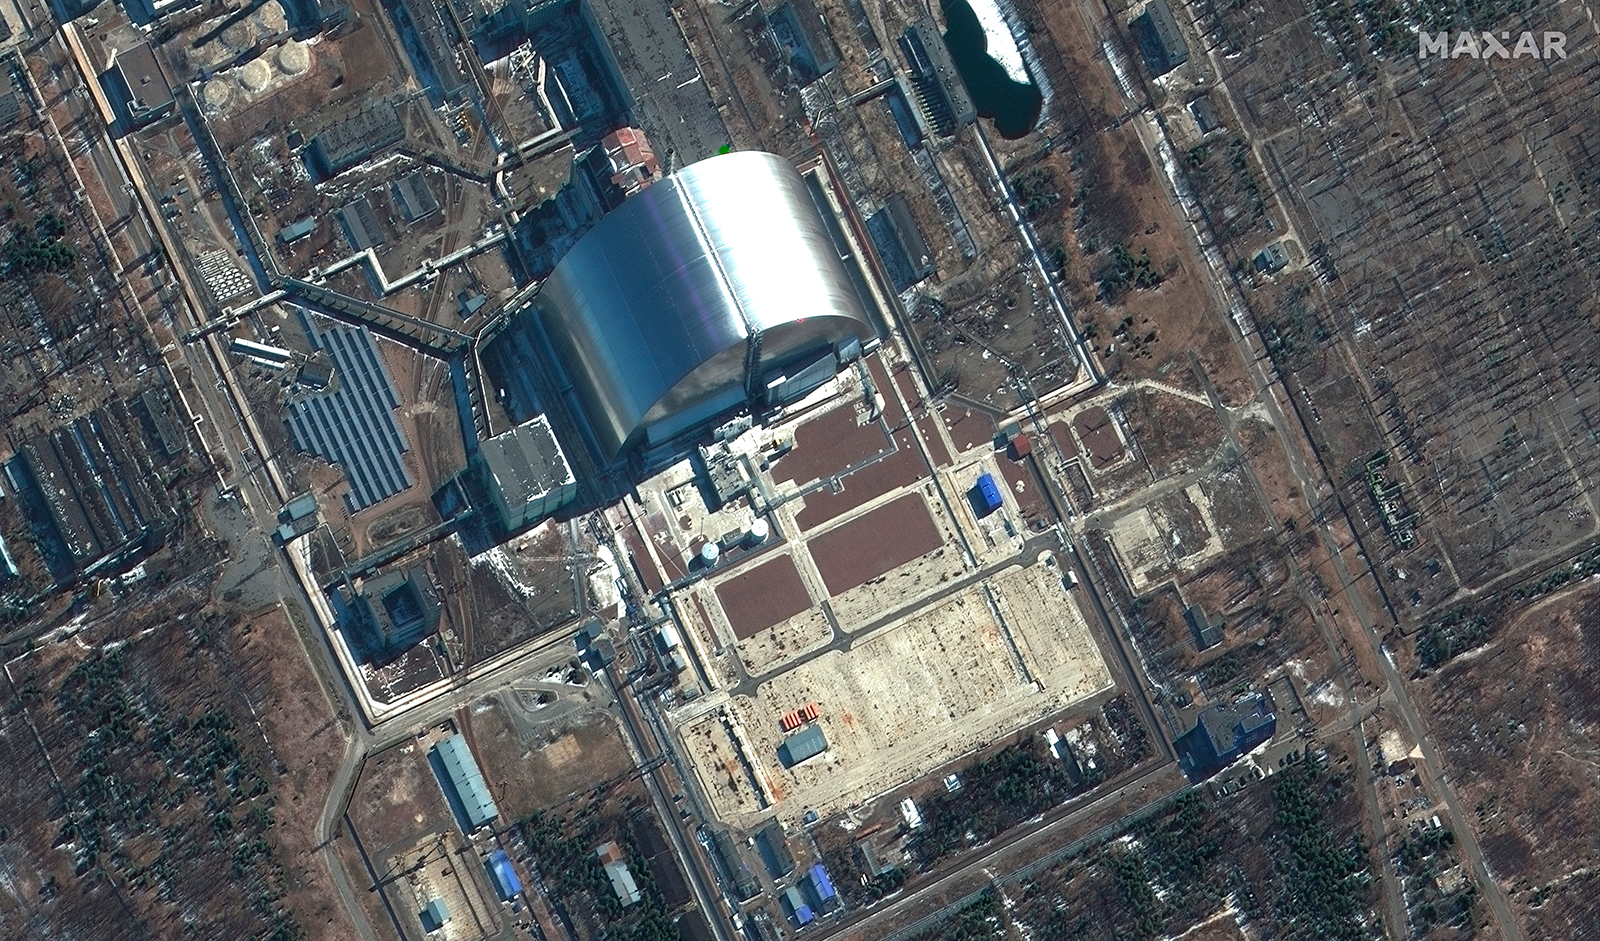 This satellite image provided by Maxar Technologies shows a close view of Chernobyl nuclear facilities, Ukraine, on Thursday, March 10.